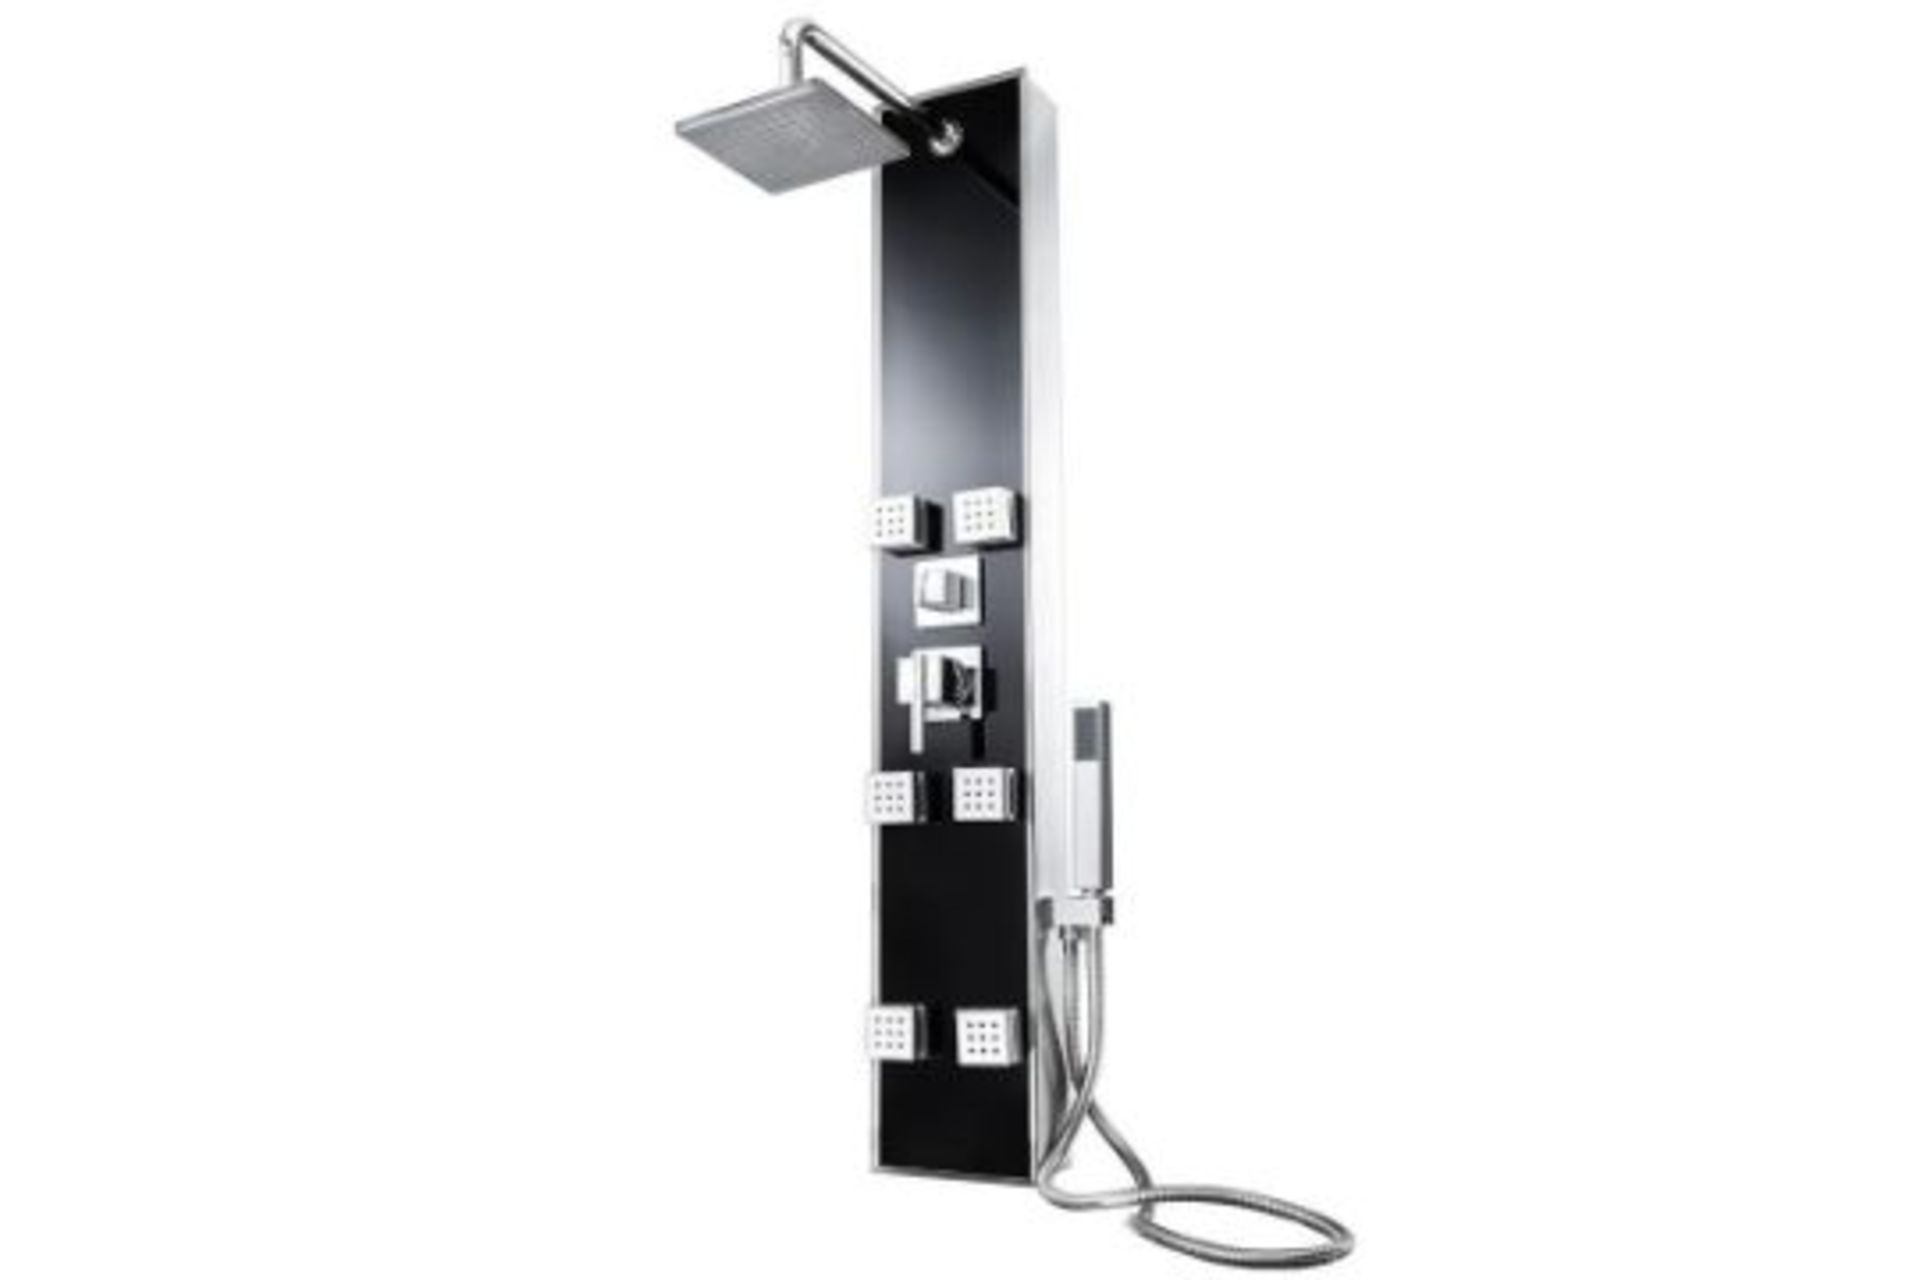 Shower panel with 6 massage jets. - PW. RRP £299.99. This elegant shower panel is an all-in-one